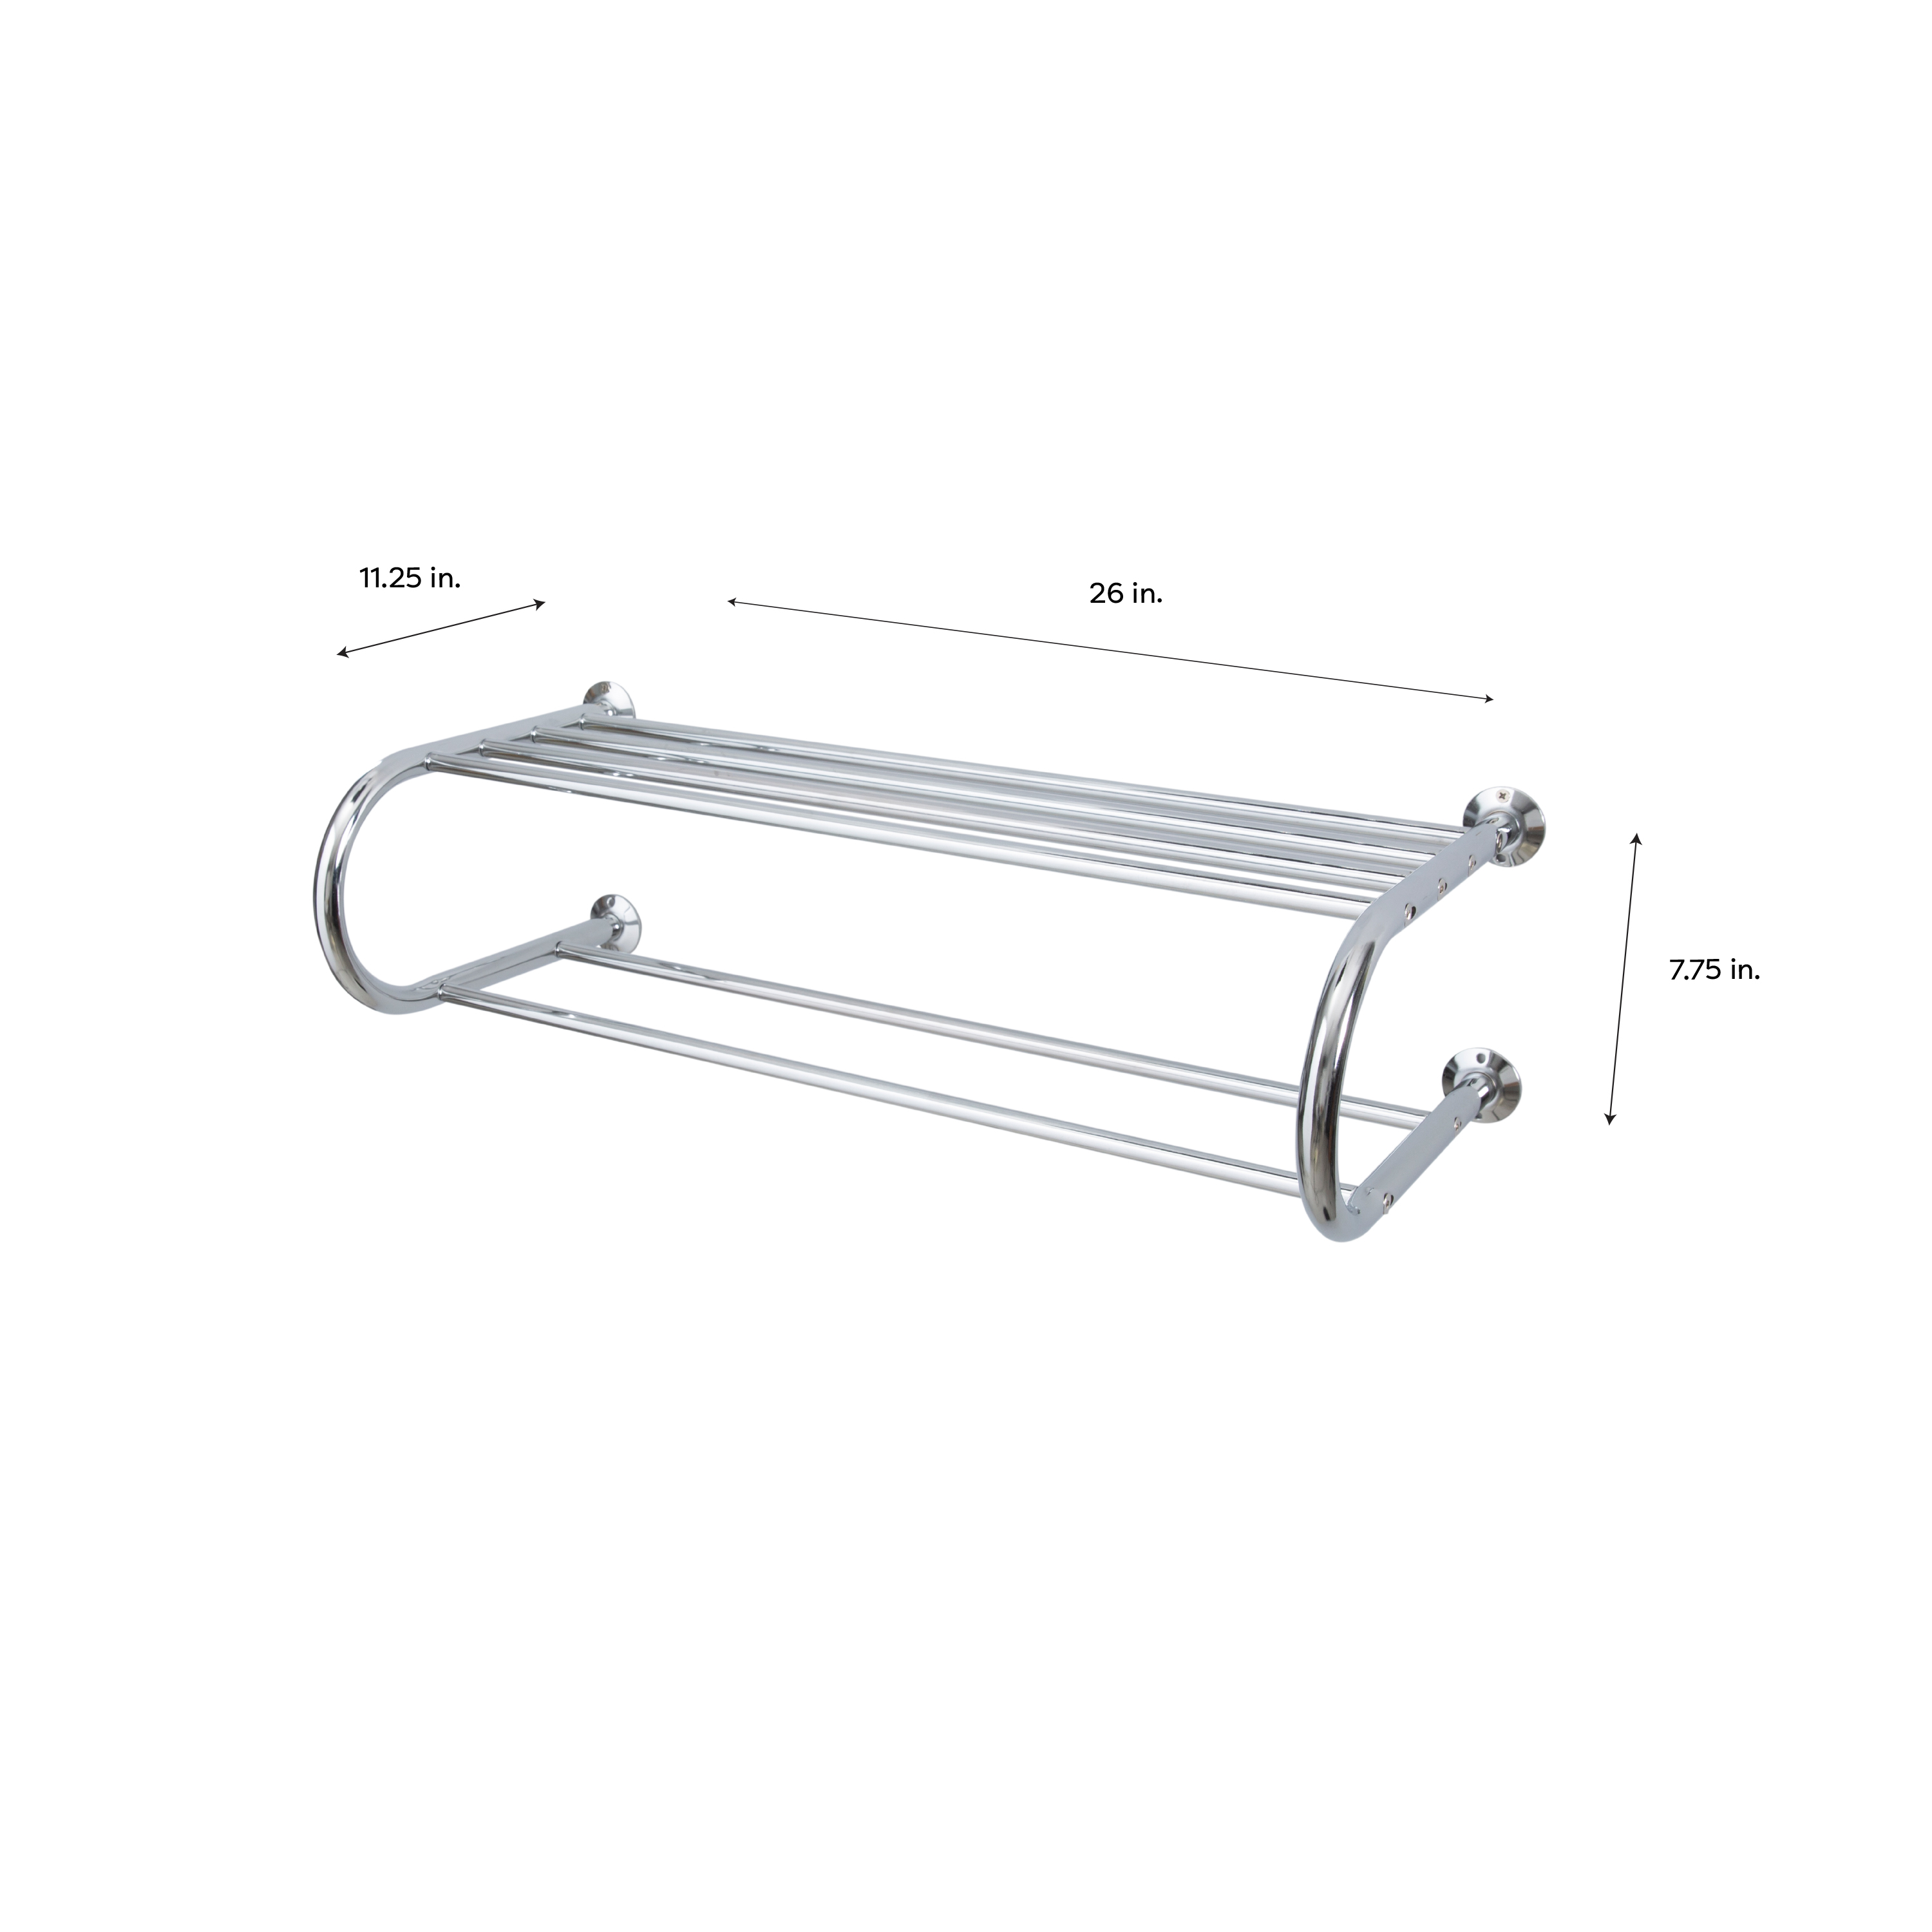 Organize It All Wall Mounted Bath Shelf with Towel Bar in Chrome - image 5 of 6